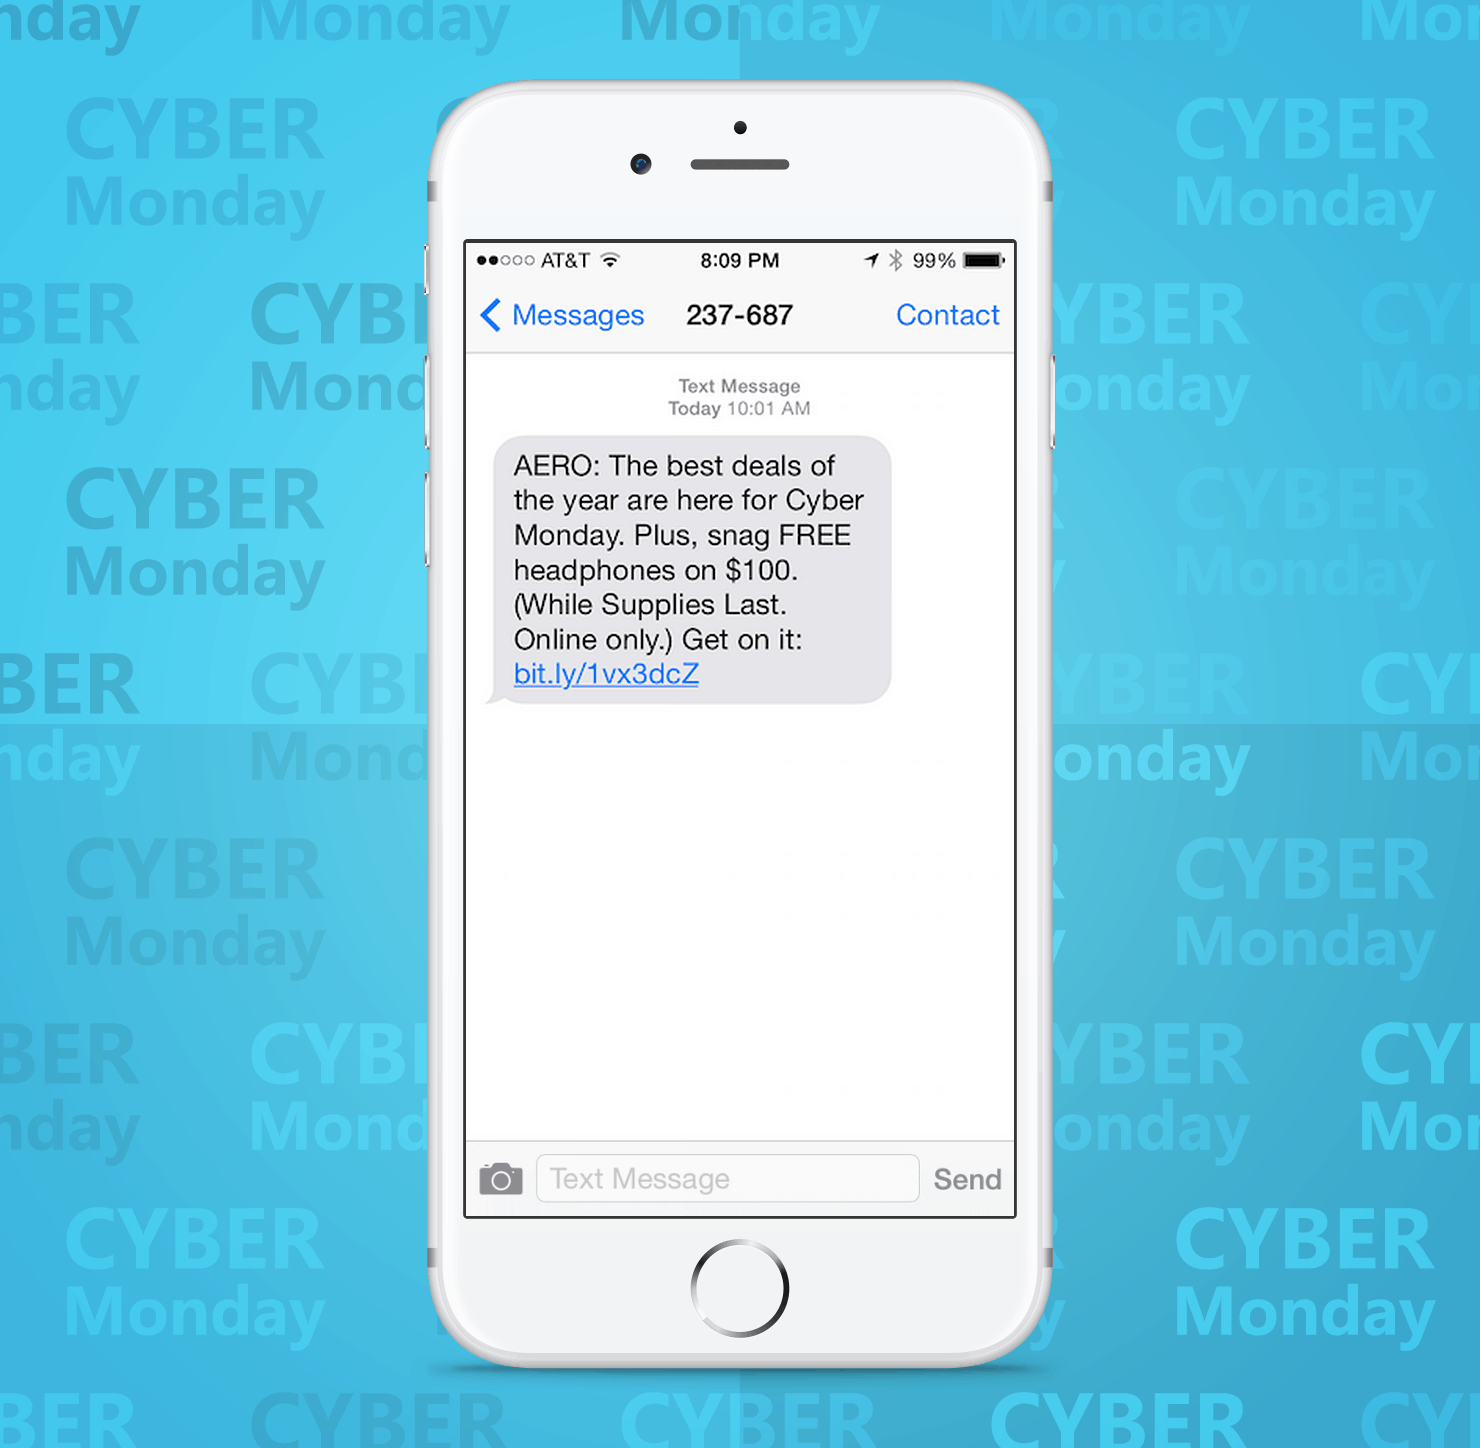 SMS Coupon Example Sent on Cyber Monday From Aero Retail Stores to Customers